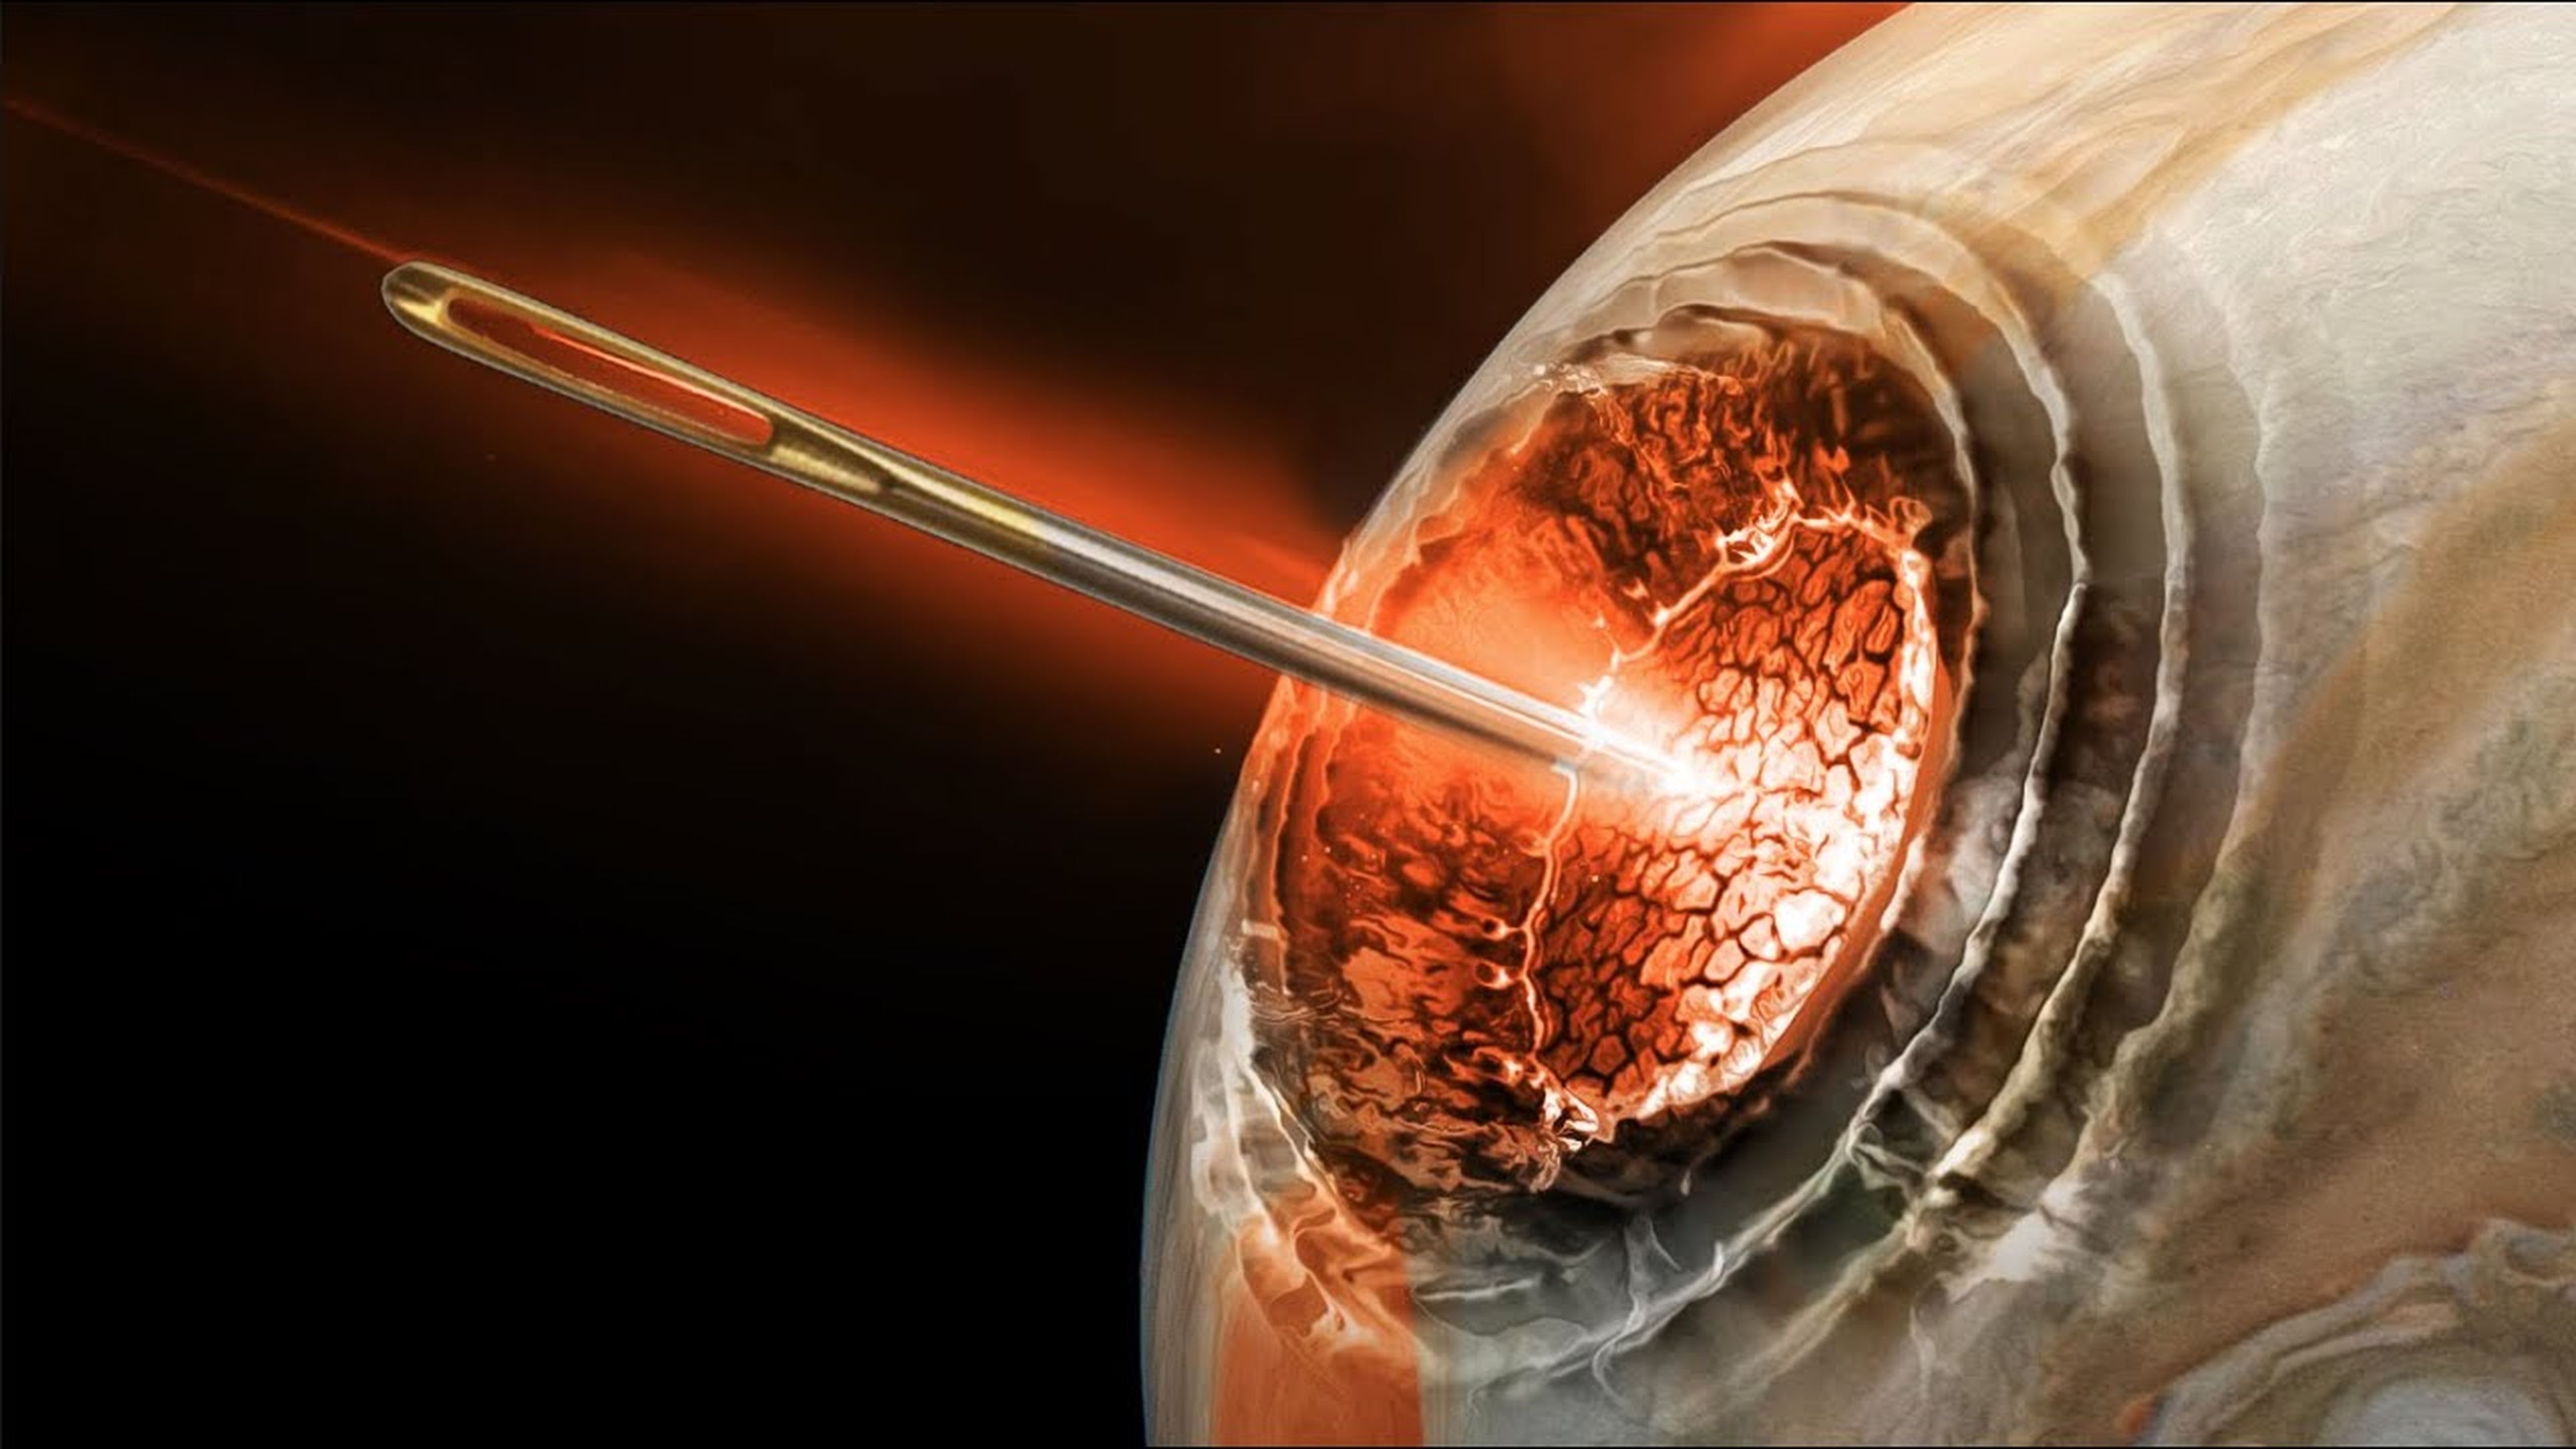 What would happen if a needle traveling at the speed of light collided with Jupiter?